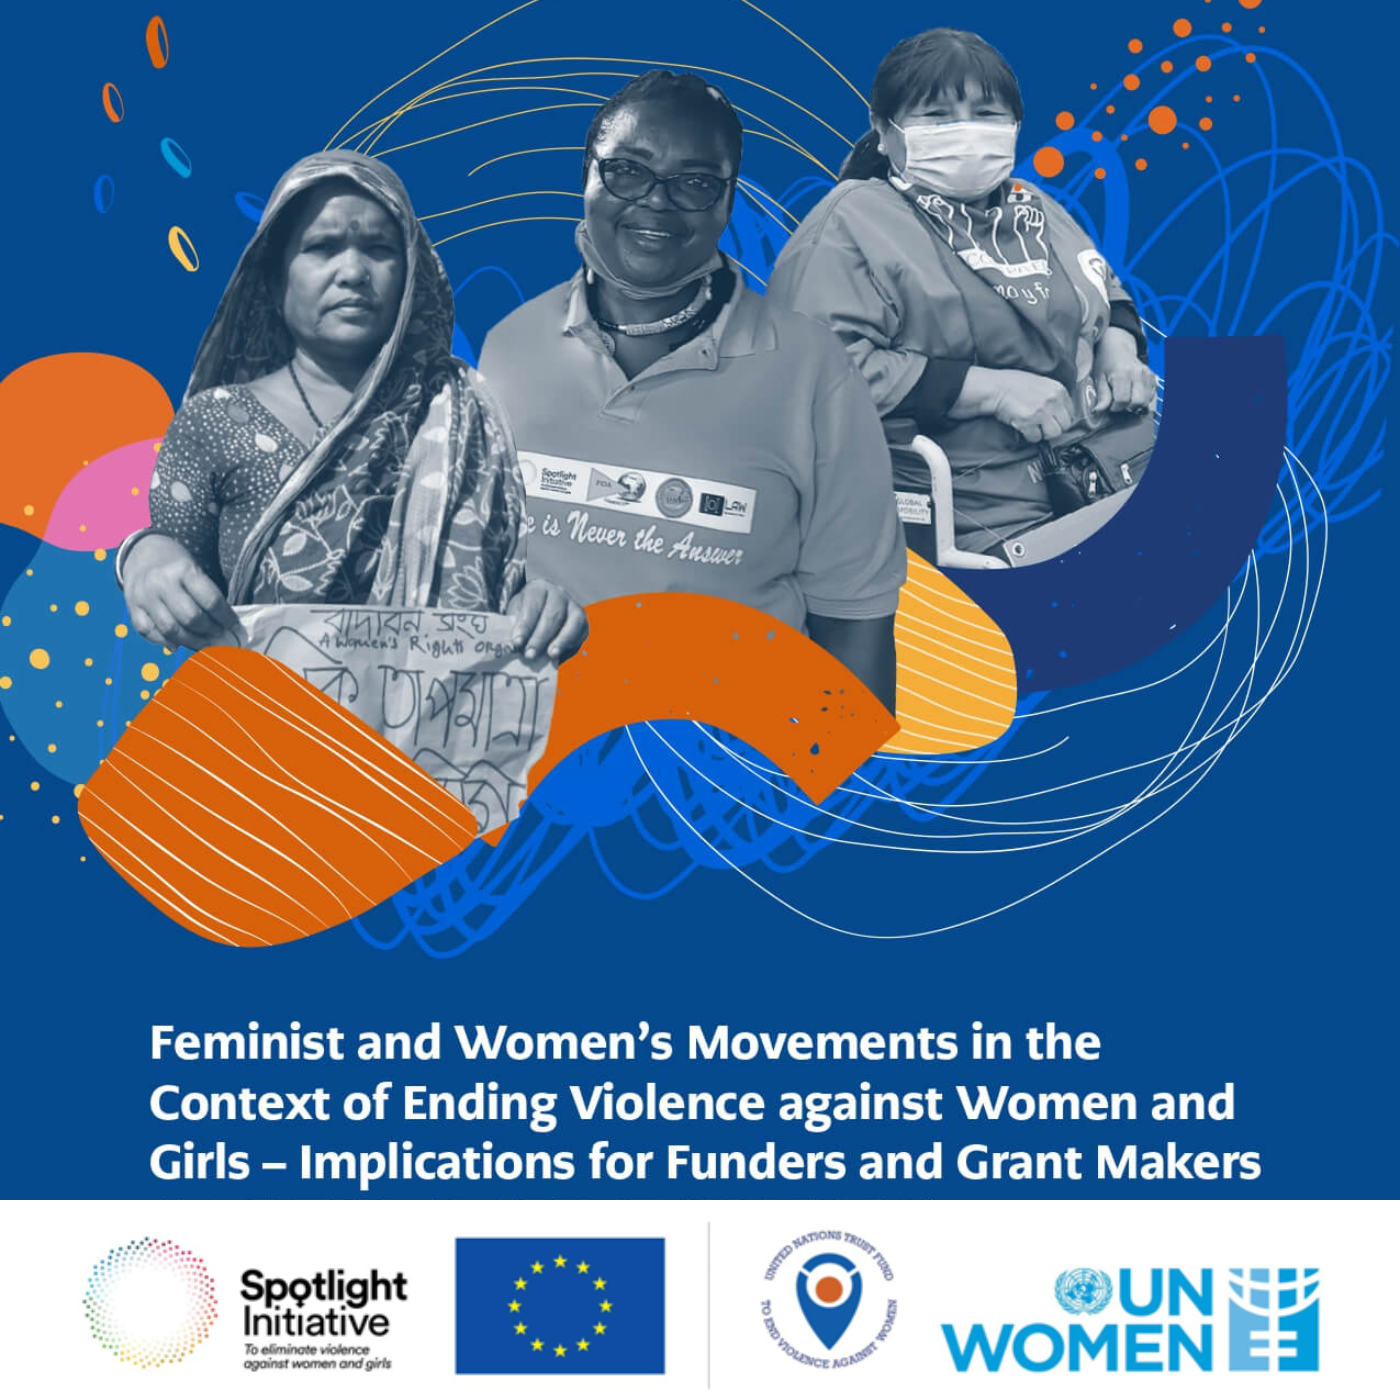 Feminist and Women's Movements in the context of ending violence against women and girls - implications for funders and grant makers